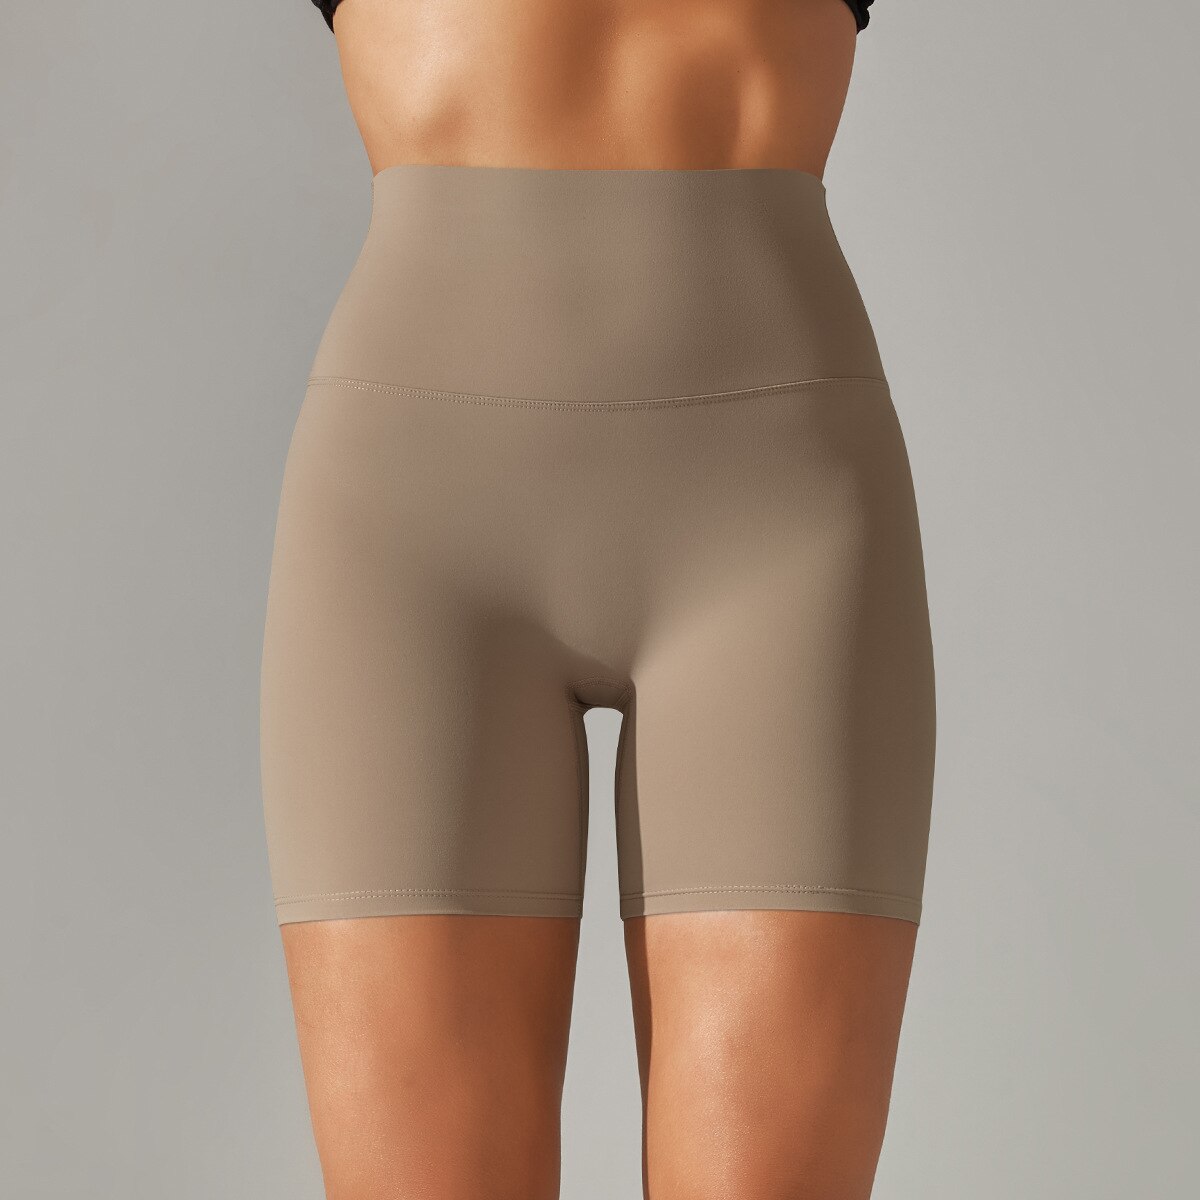 Summer Shorts Chic Gym Wear Cocoa XS